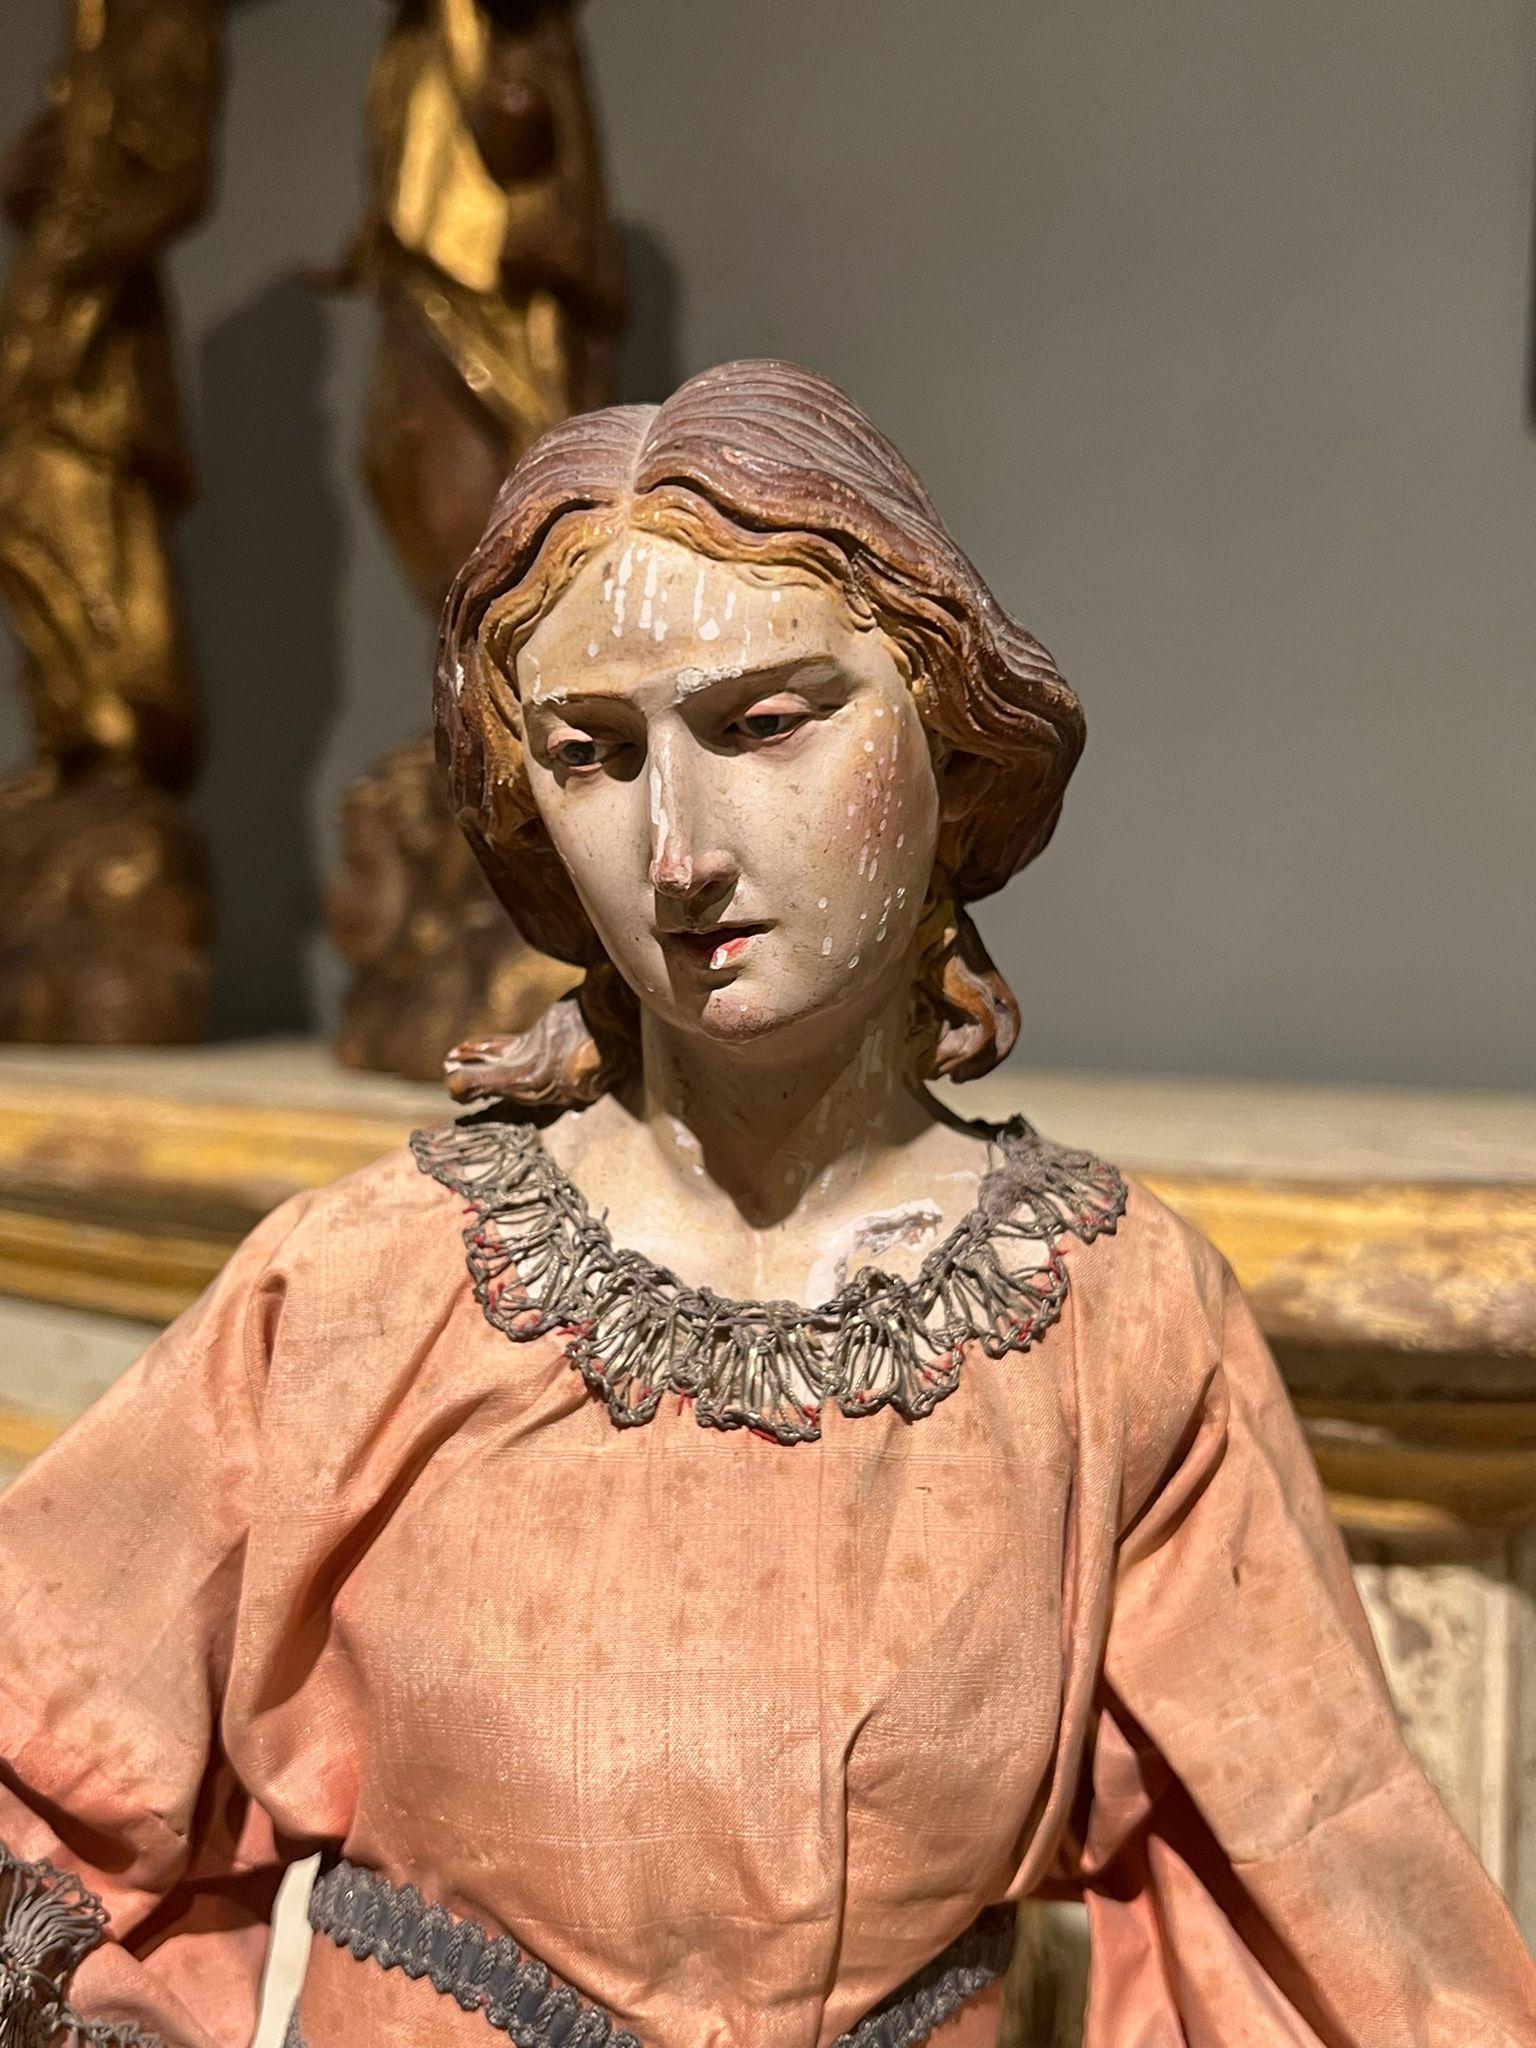 Terracotta statue depicting a female figure. The statue features glass eyes and original dress. The quality of the face and hands is very refined, Naples, 18th century.

Dimensions: 11x11x51.